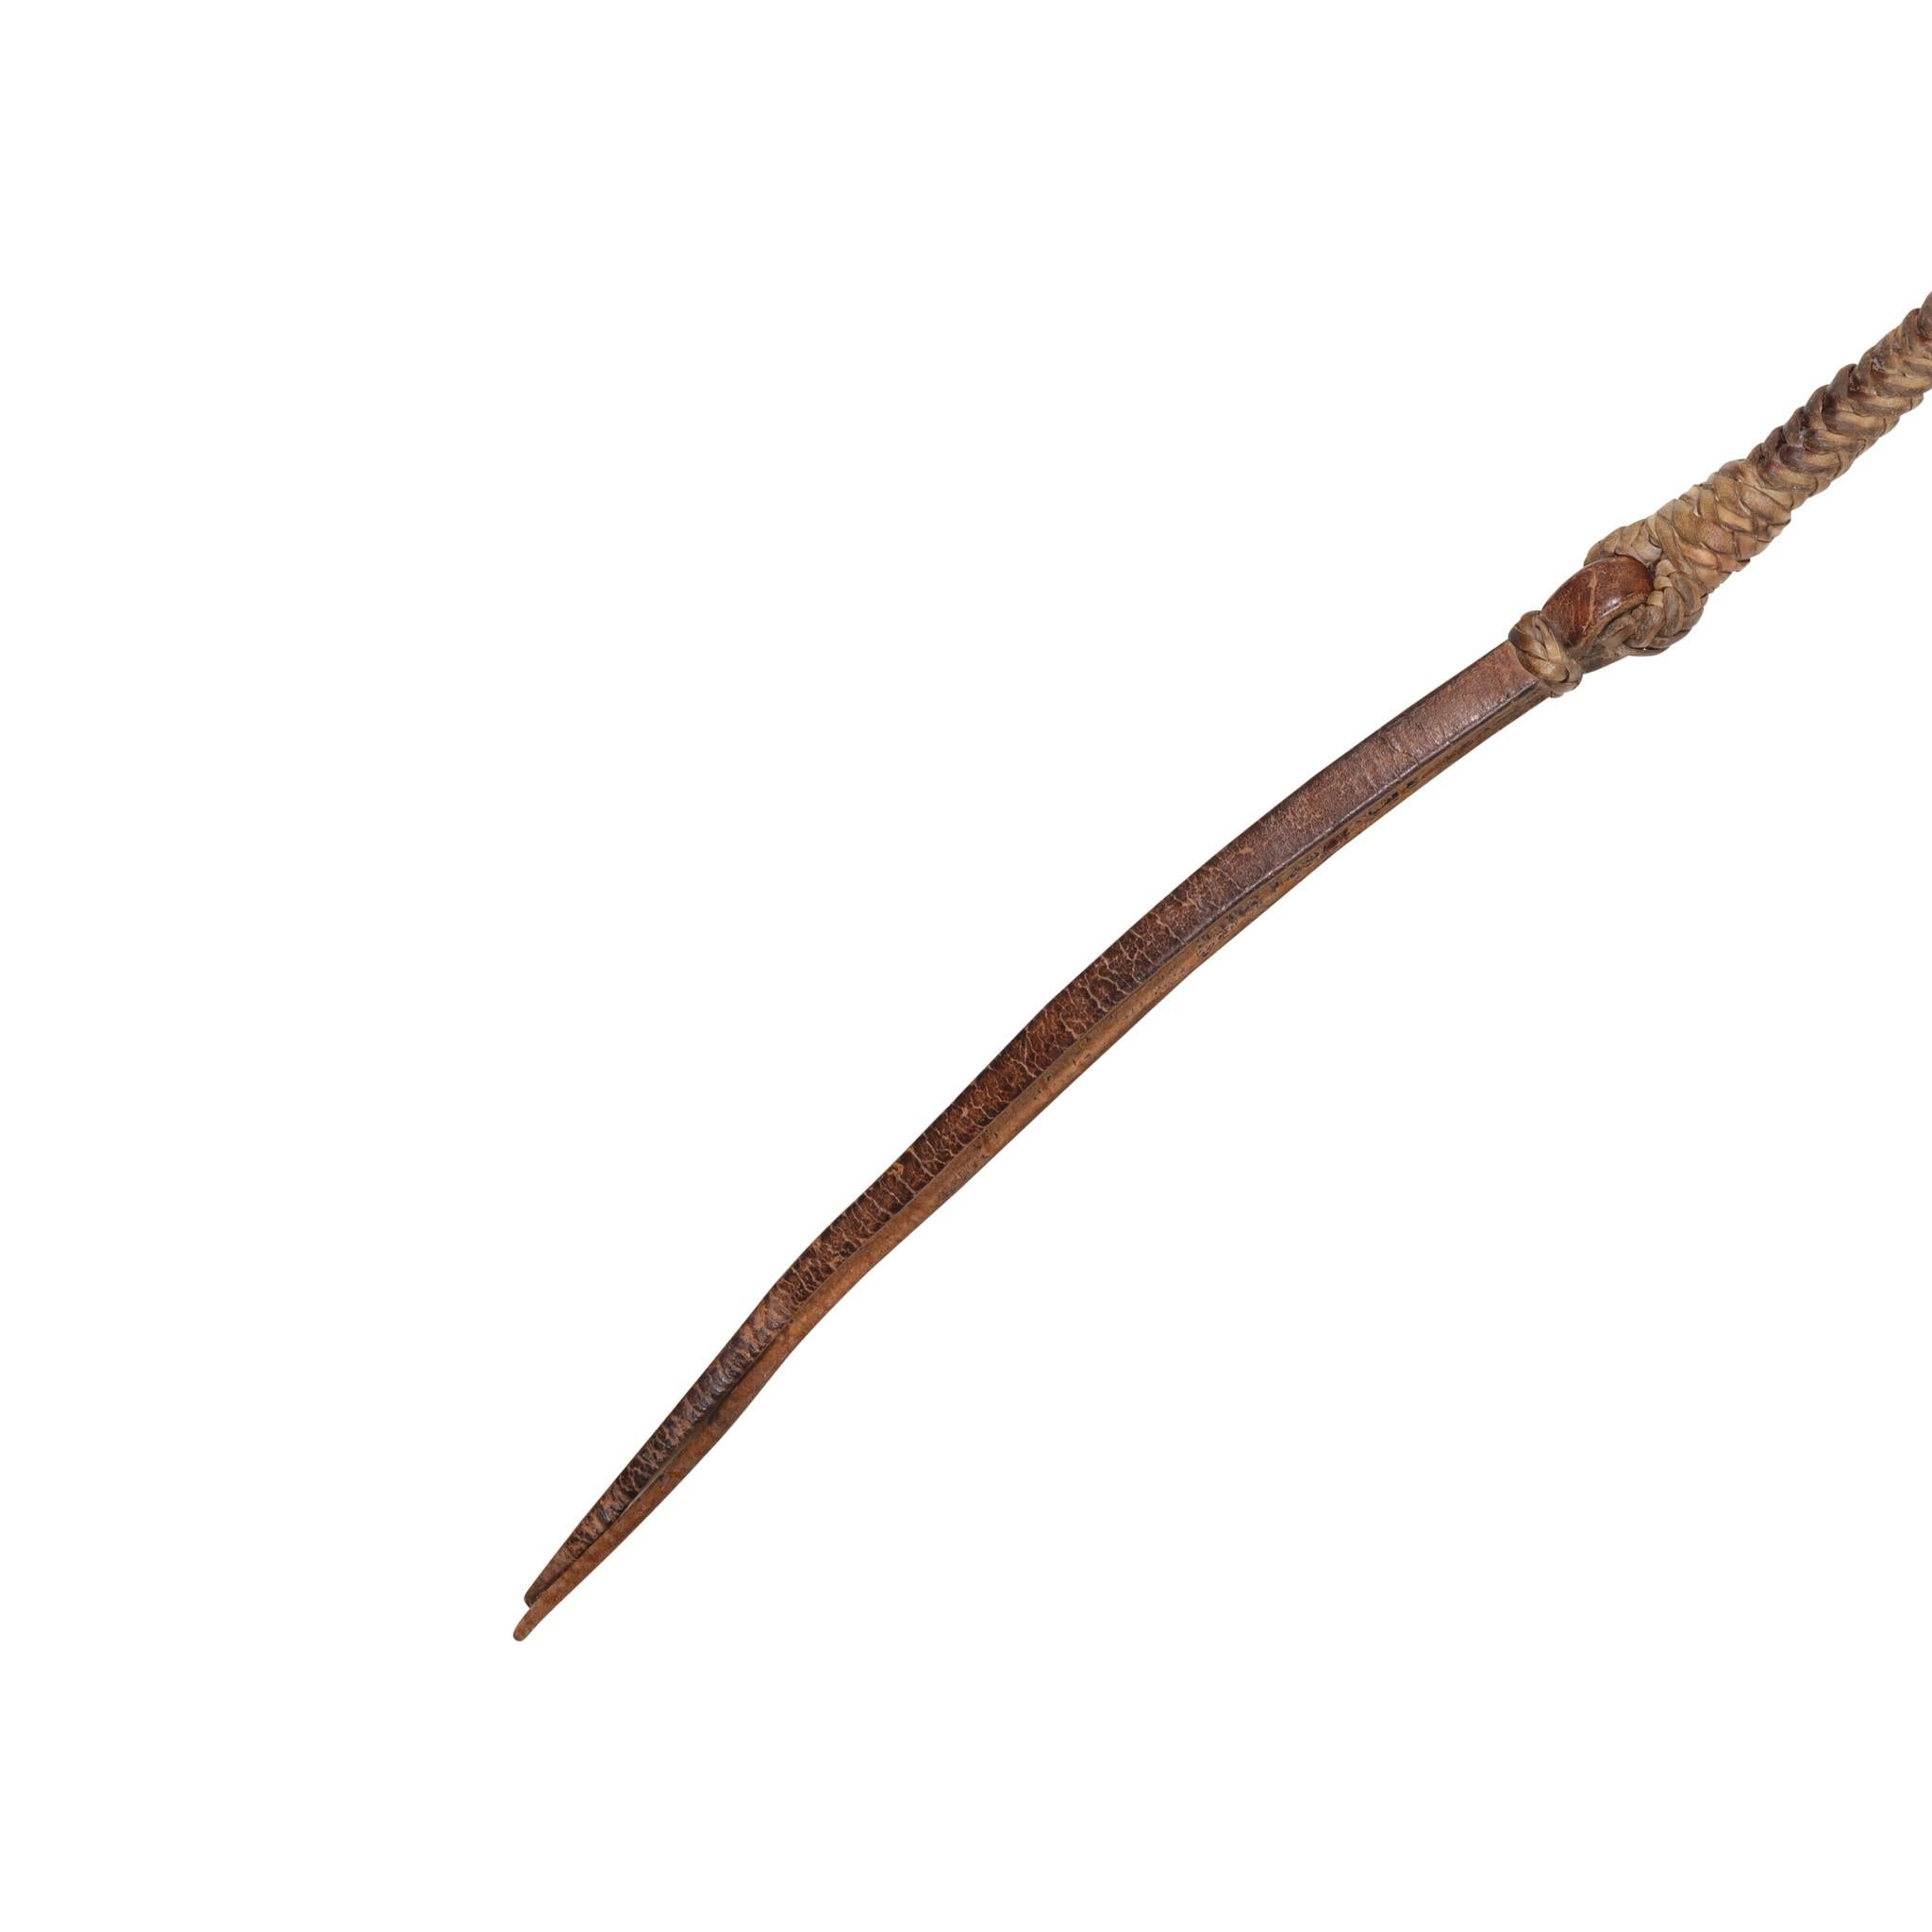 Rawhide braided quirt with lead filled handle. Nice patina.

Period: Last quarter 19th century

Origin: Montana

Size: 17